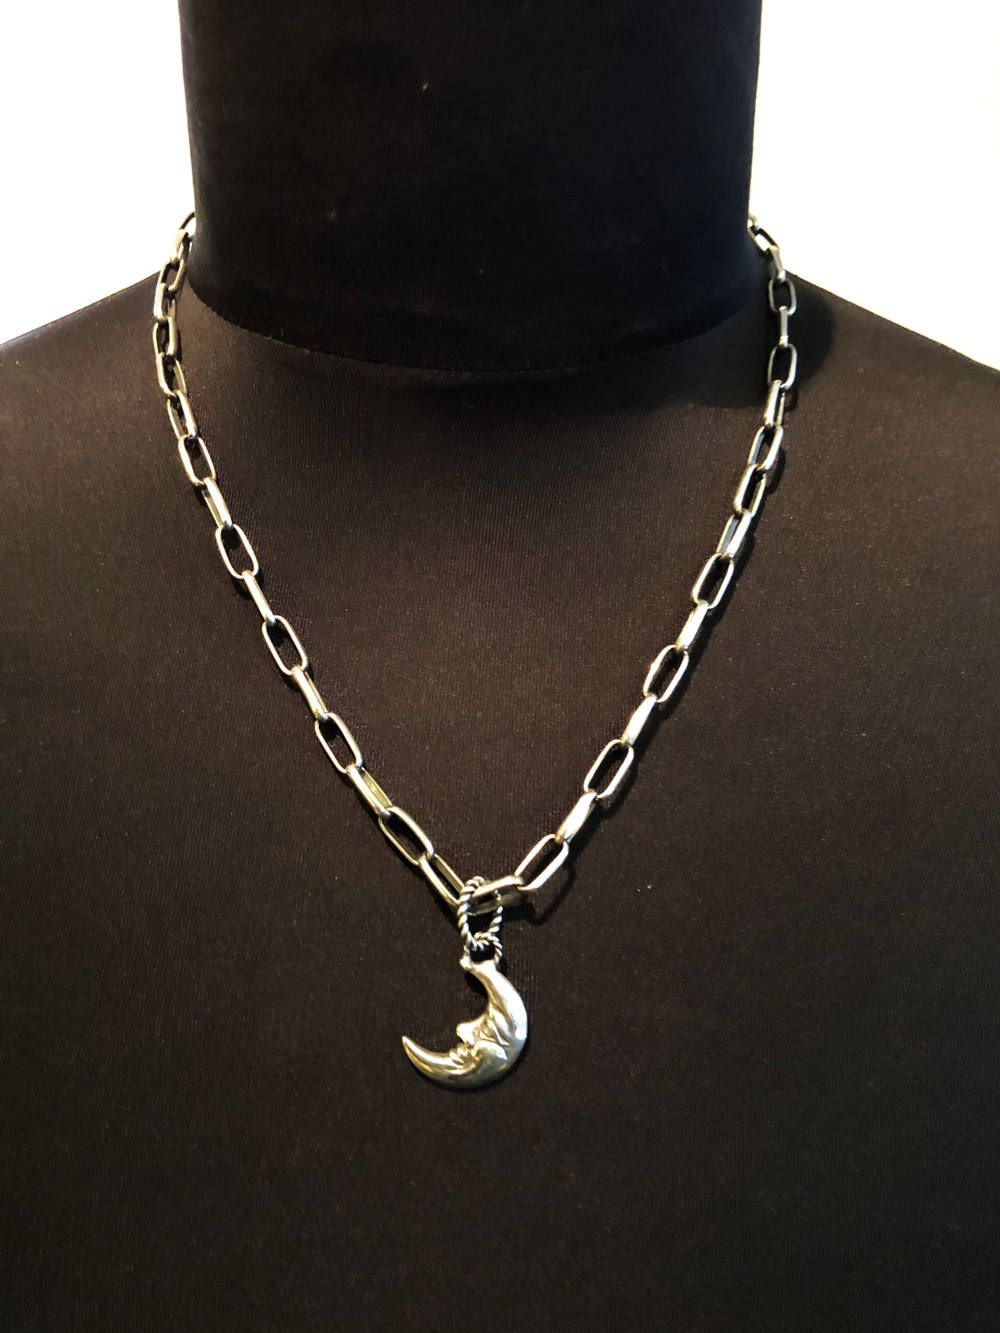 galcia / ガルシア NECKLACE CHAIN SILVER 925 シルバー ネックレス